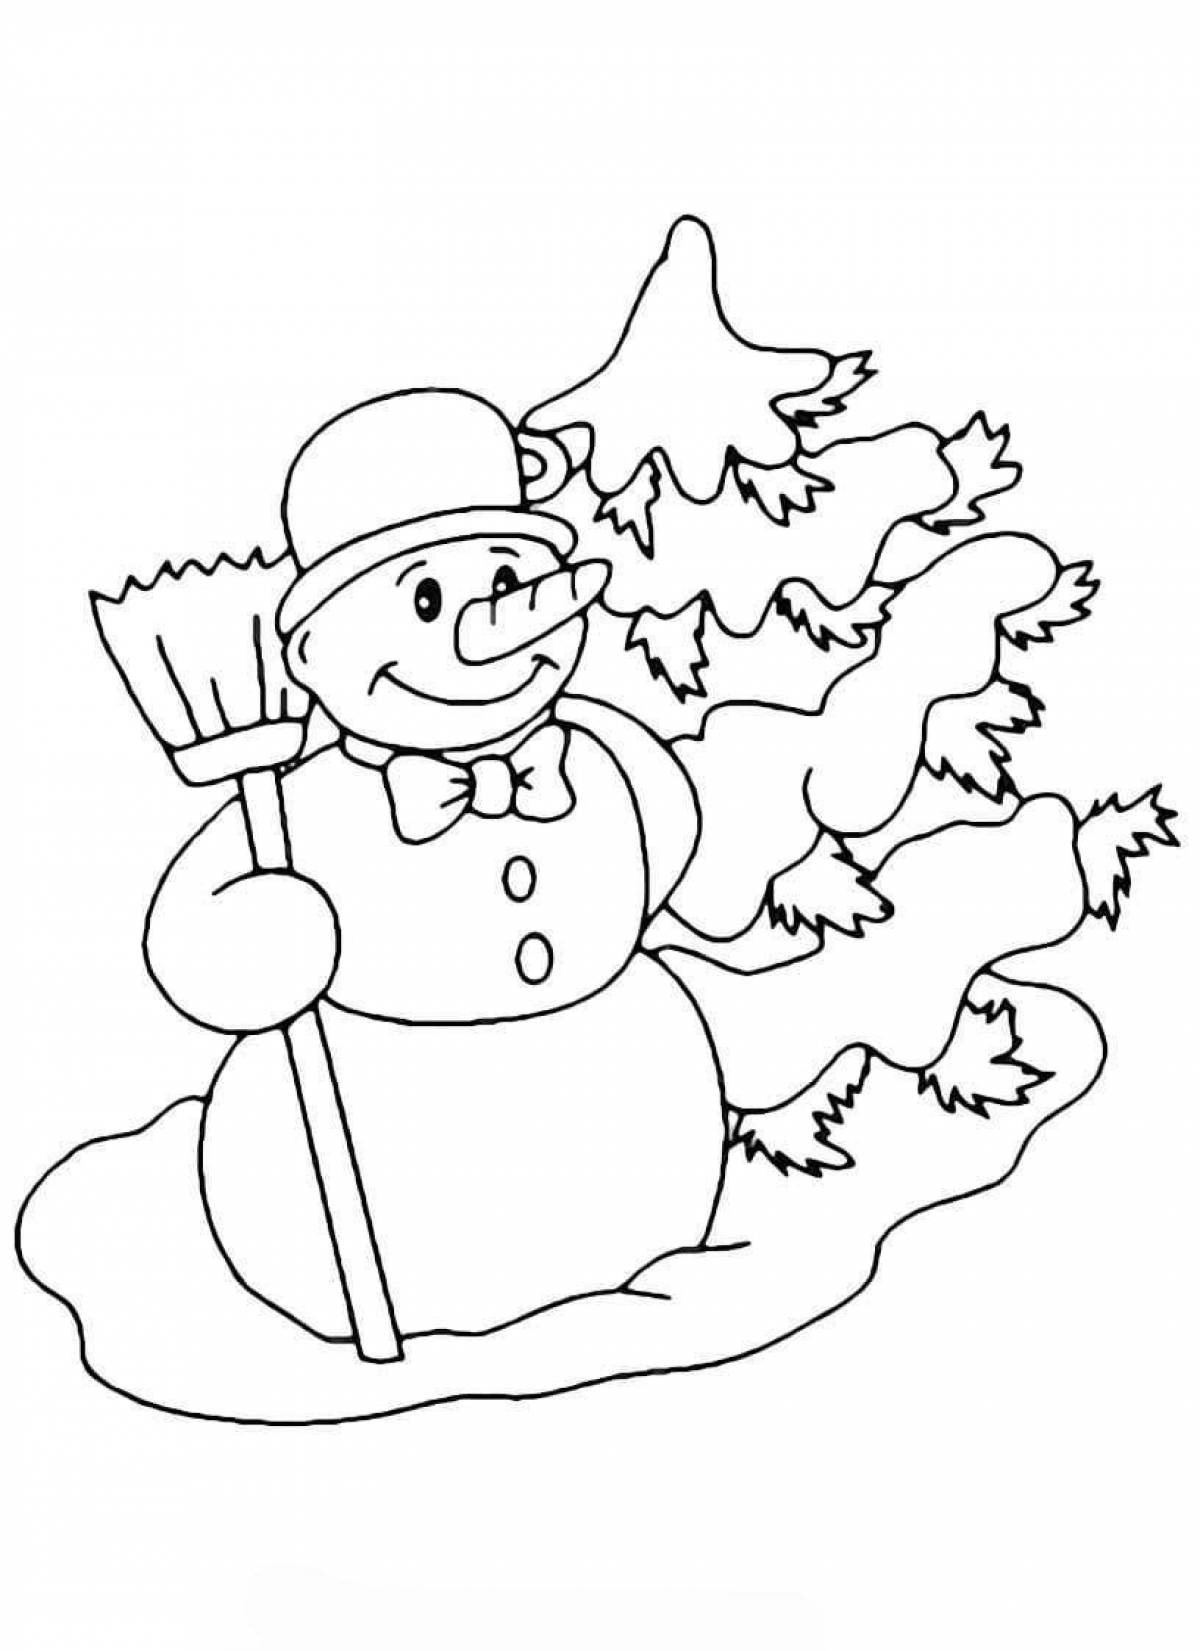 Colorful snowman coloring pages